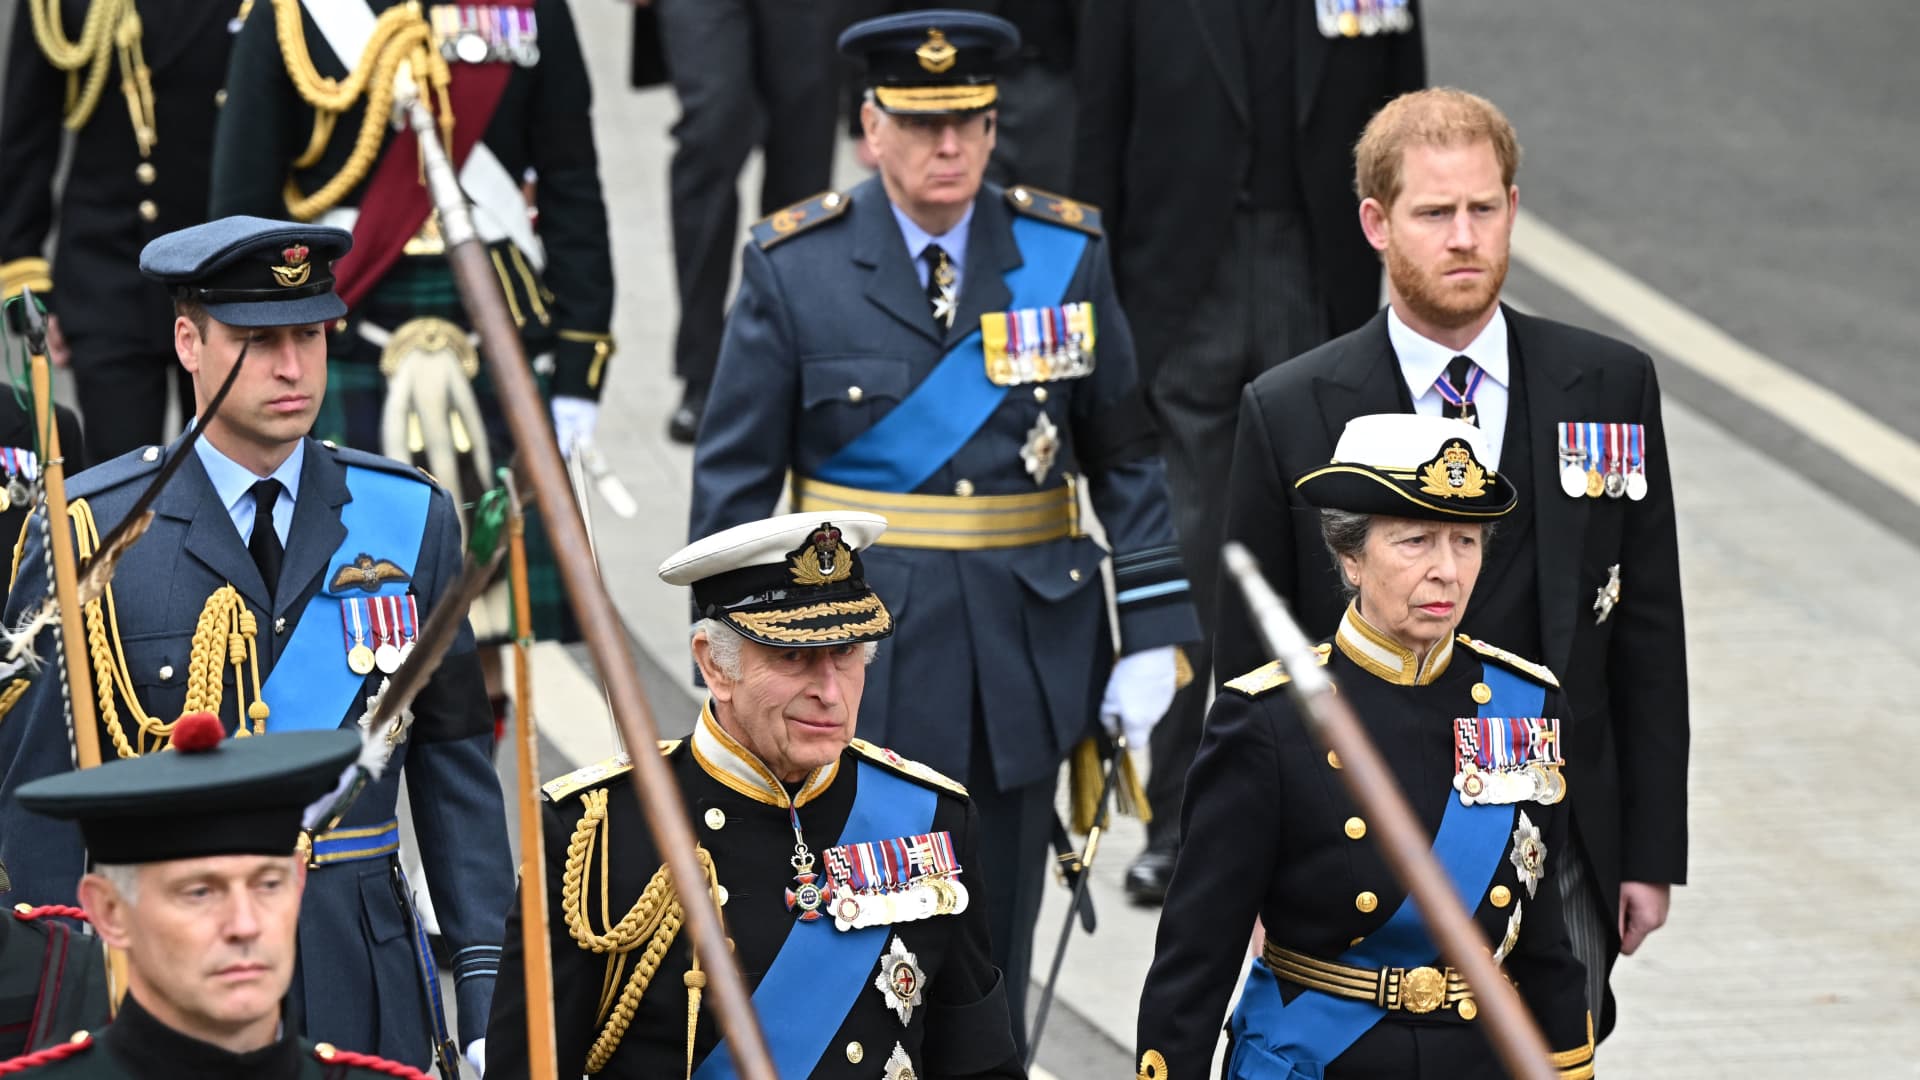 (Centre L-R) Britain's Prince William, Prince of Wales, Britain's King Charles III, Duke of Sussex and Britain's Princess Anne, Princess Royal and Britain's Prince Harry arrive to take their seats inside Westminster Abbey in London on September 19, 2022, for the State Funeral Service for Britain's Queen Elizabeth II.